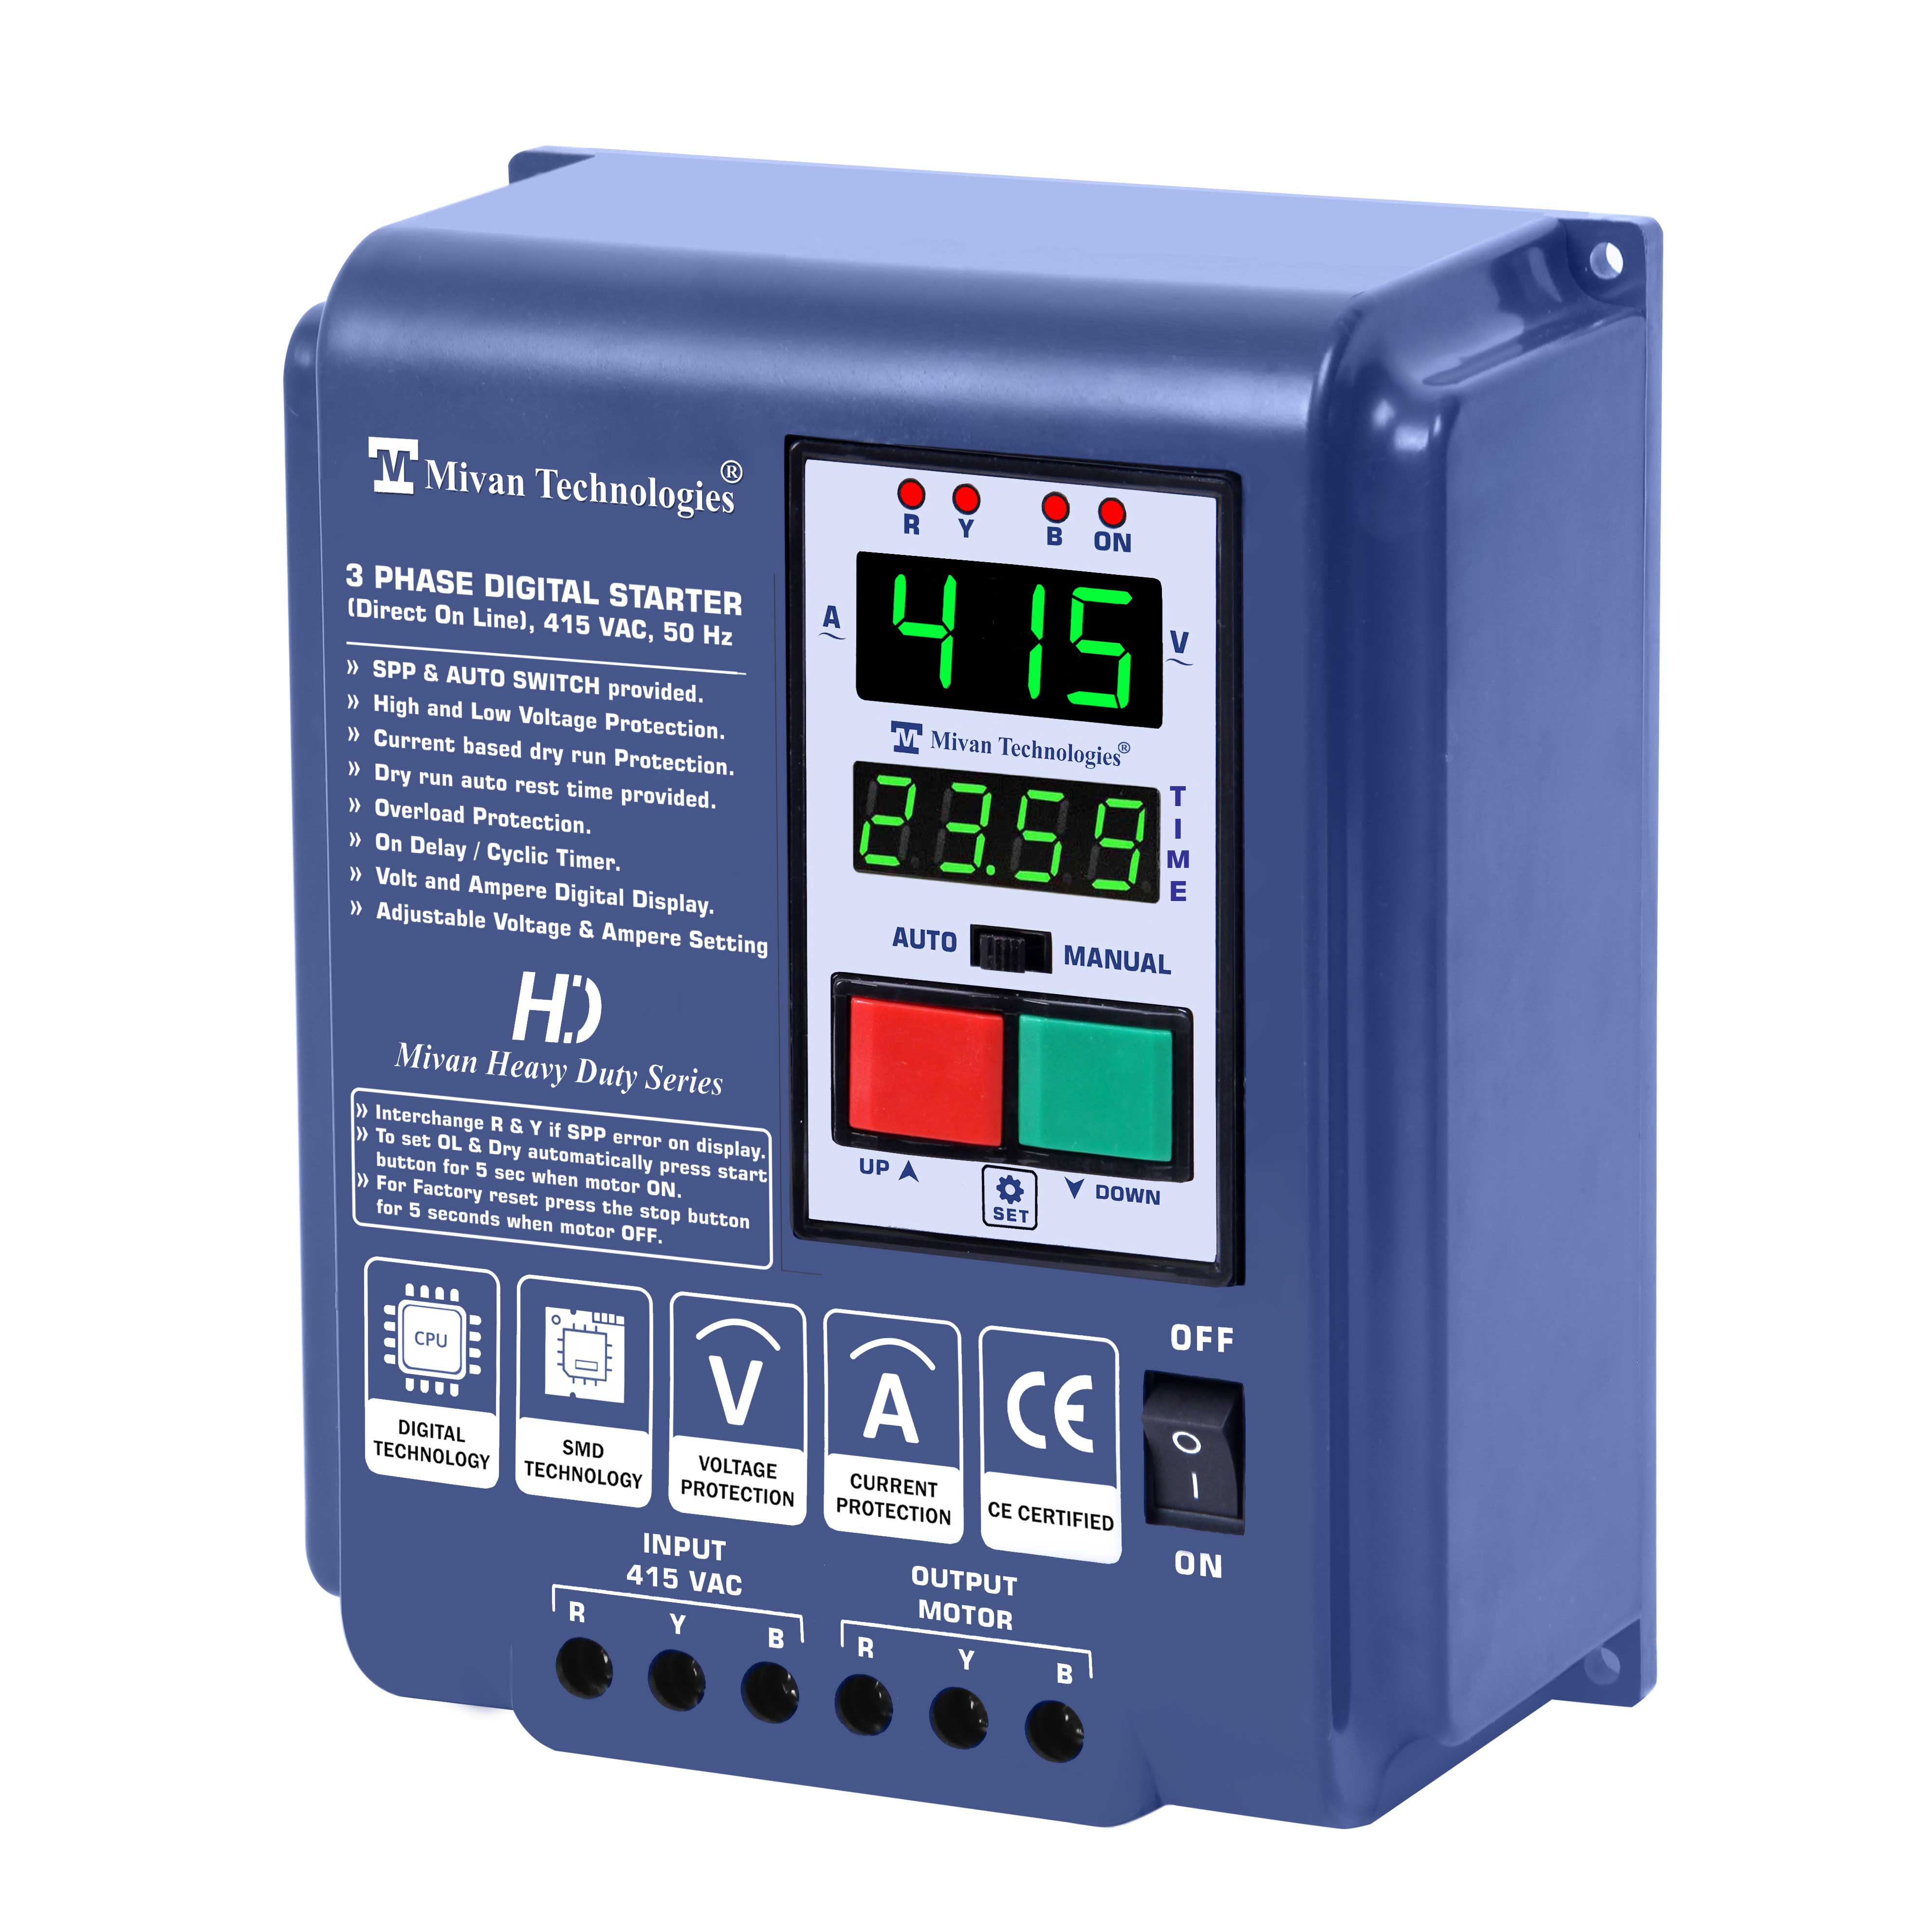 DP301S  RTC  HD 3 PHASE Digital DOL starter with REAL TIME TIMER with V A meter with HV LV OL DRY PROTECTION with cyclic TIMER with SPP and Auto switch